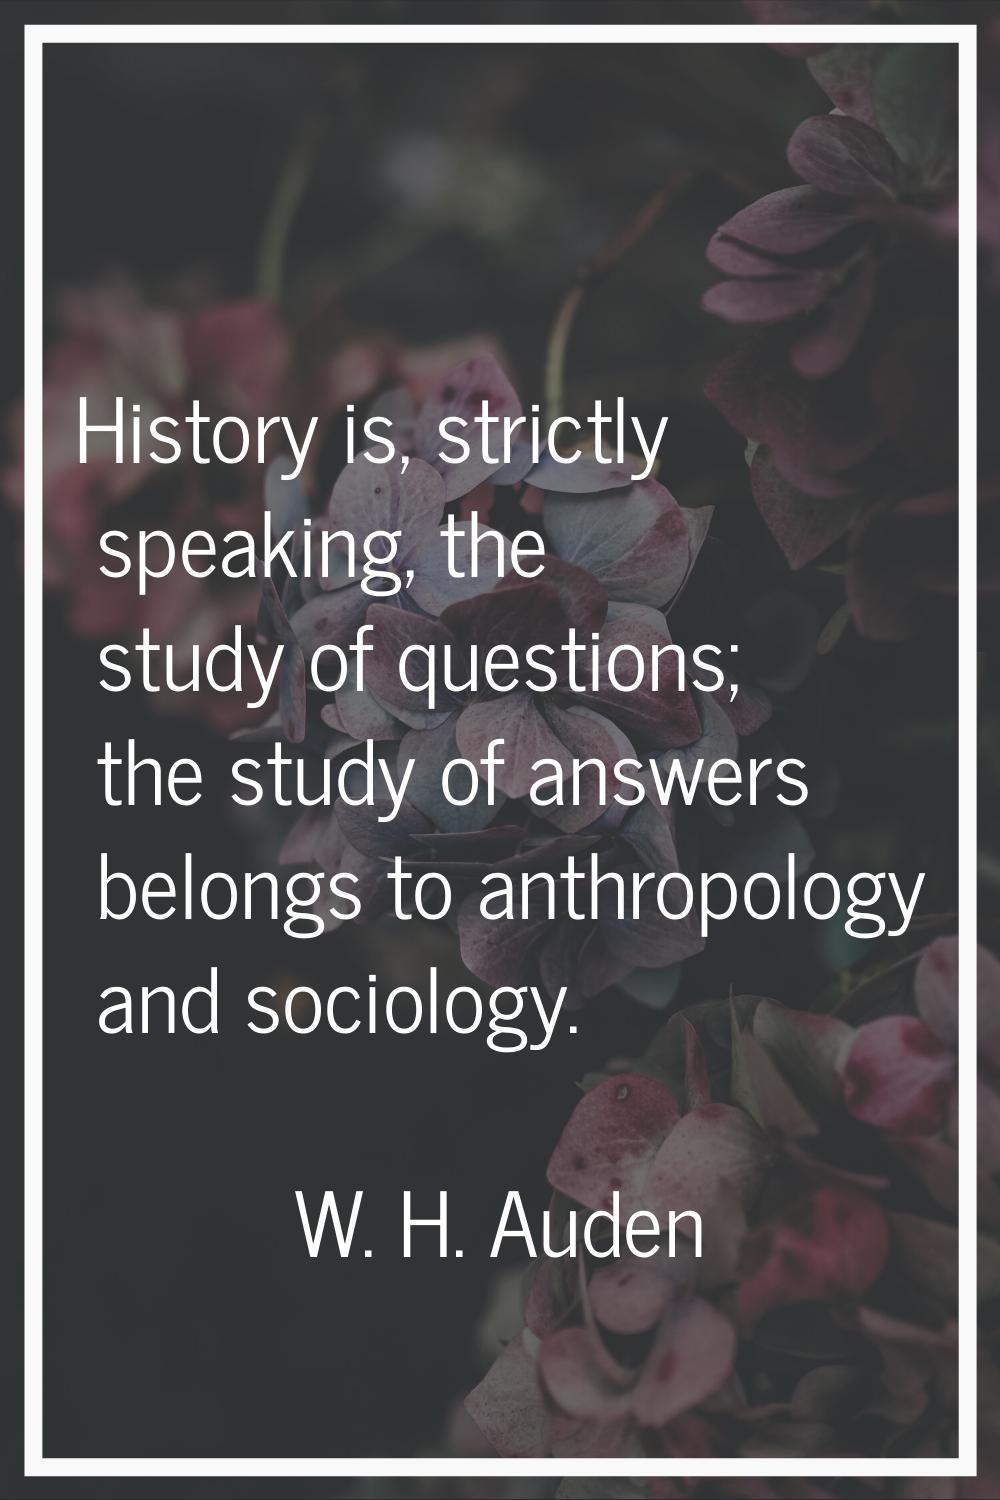 History is, strictly speaking, the study of questions; the study of answers belongs to anthropology